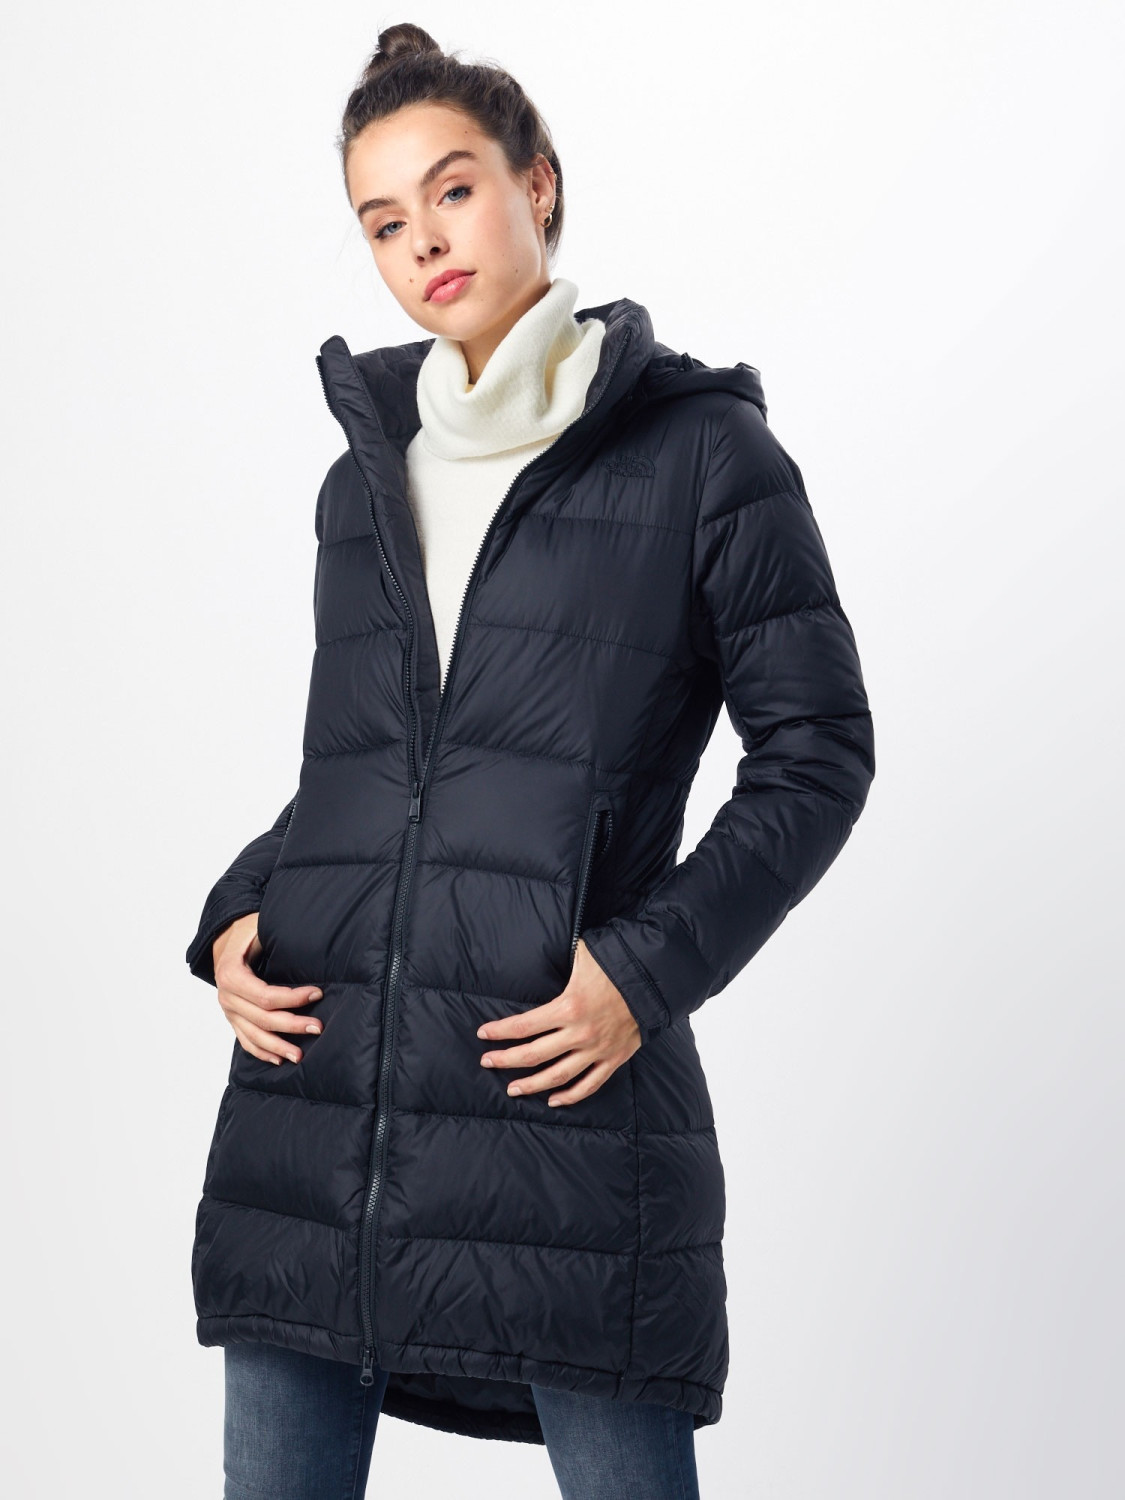 Buy The North Face Women s Metropolis Parka III tnf black from £311.69 ...